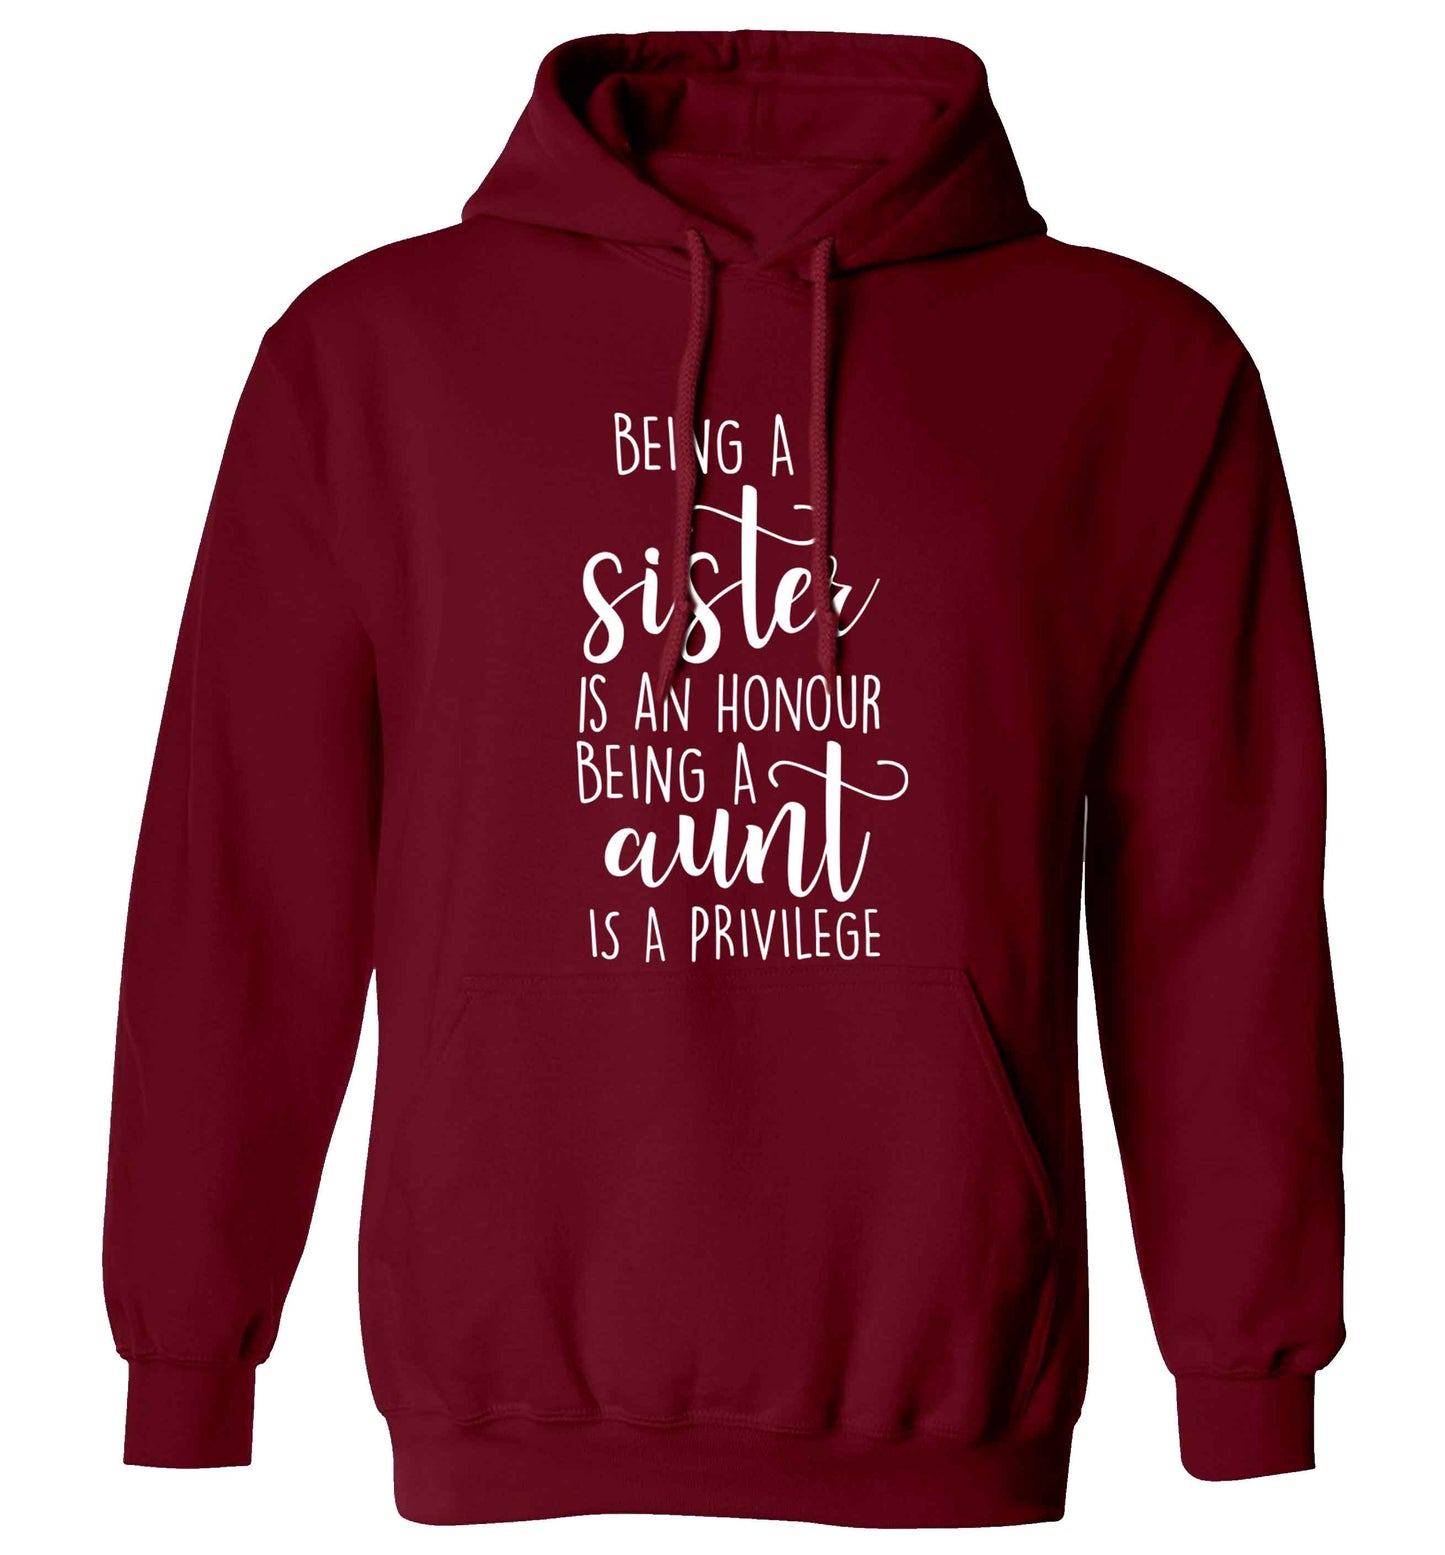 Being a sister is an honour being an auntie is a privilege adults unisex maroon hoodie 2XL